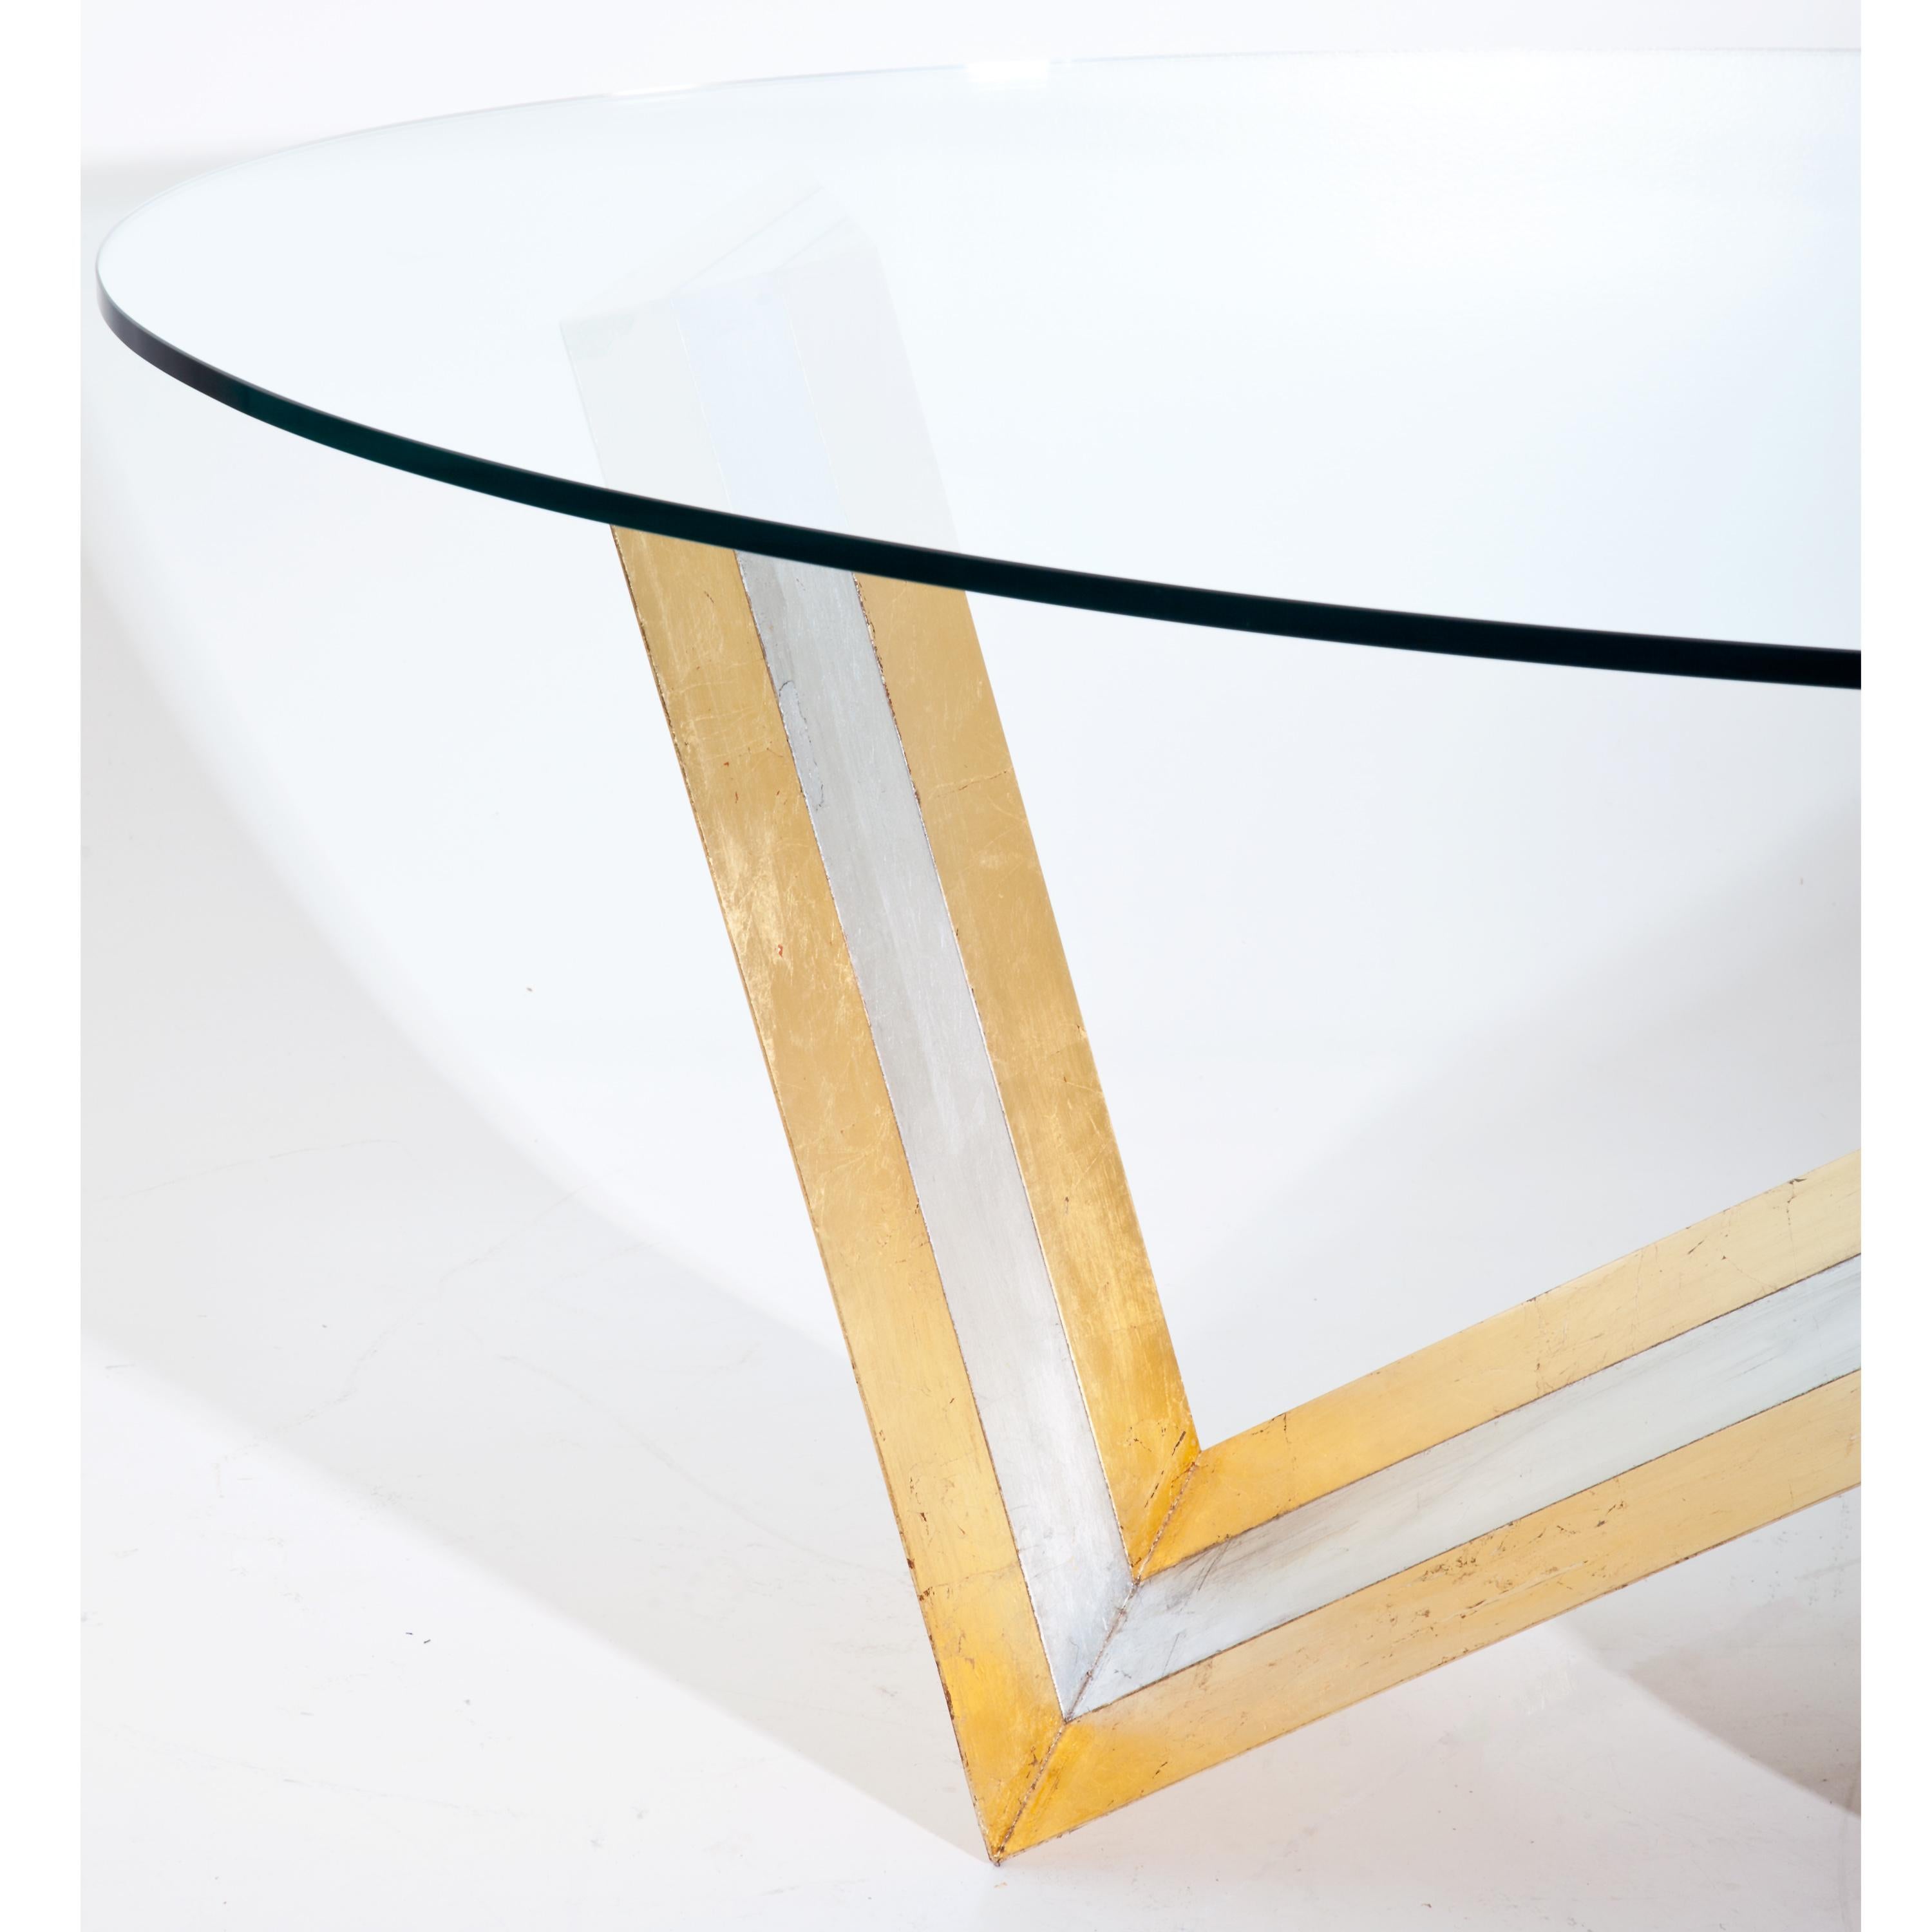 oval glass table top